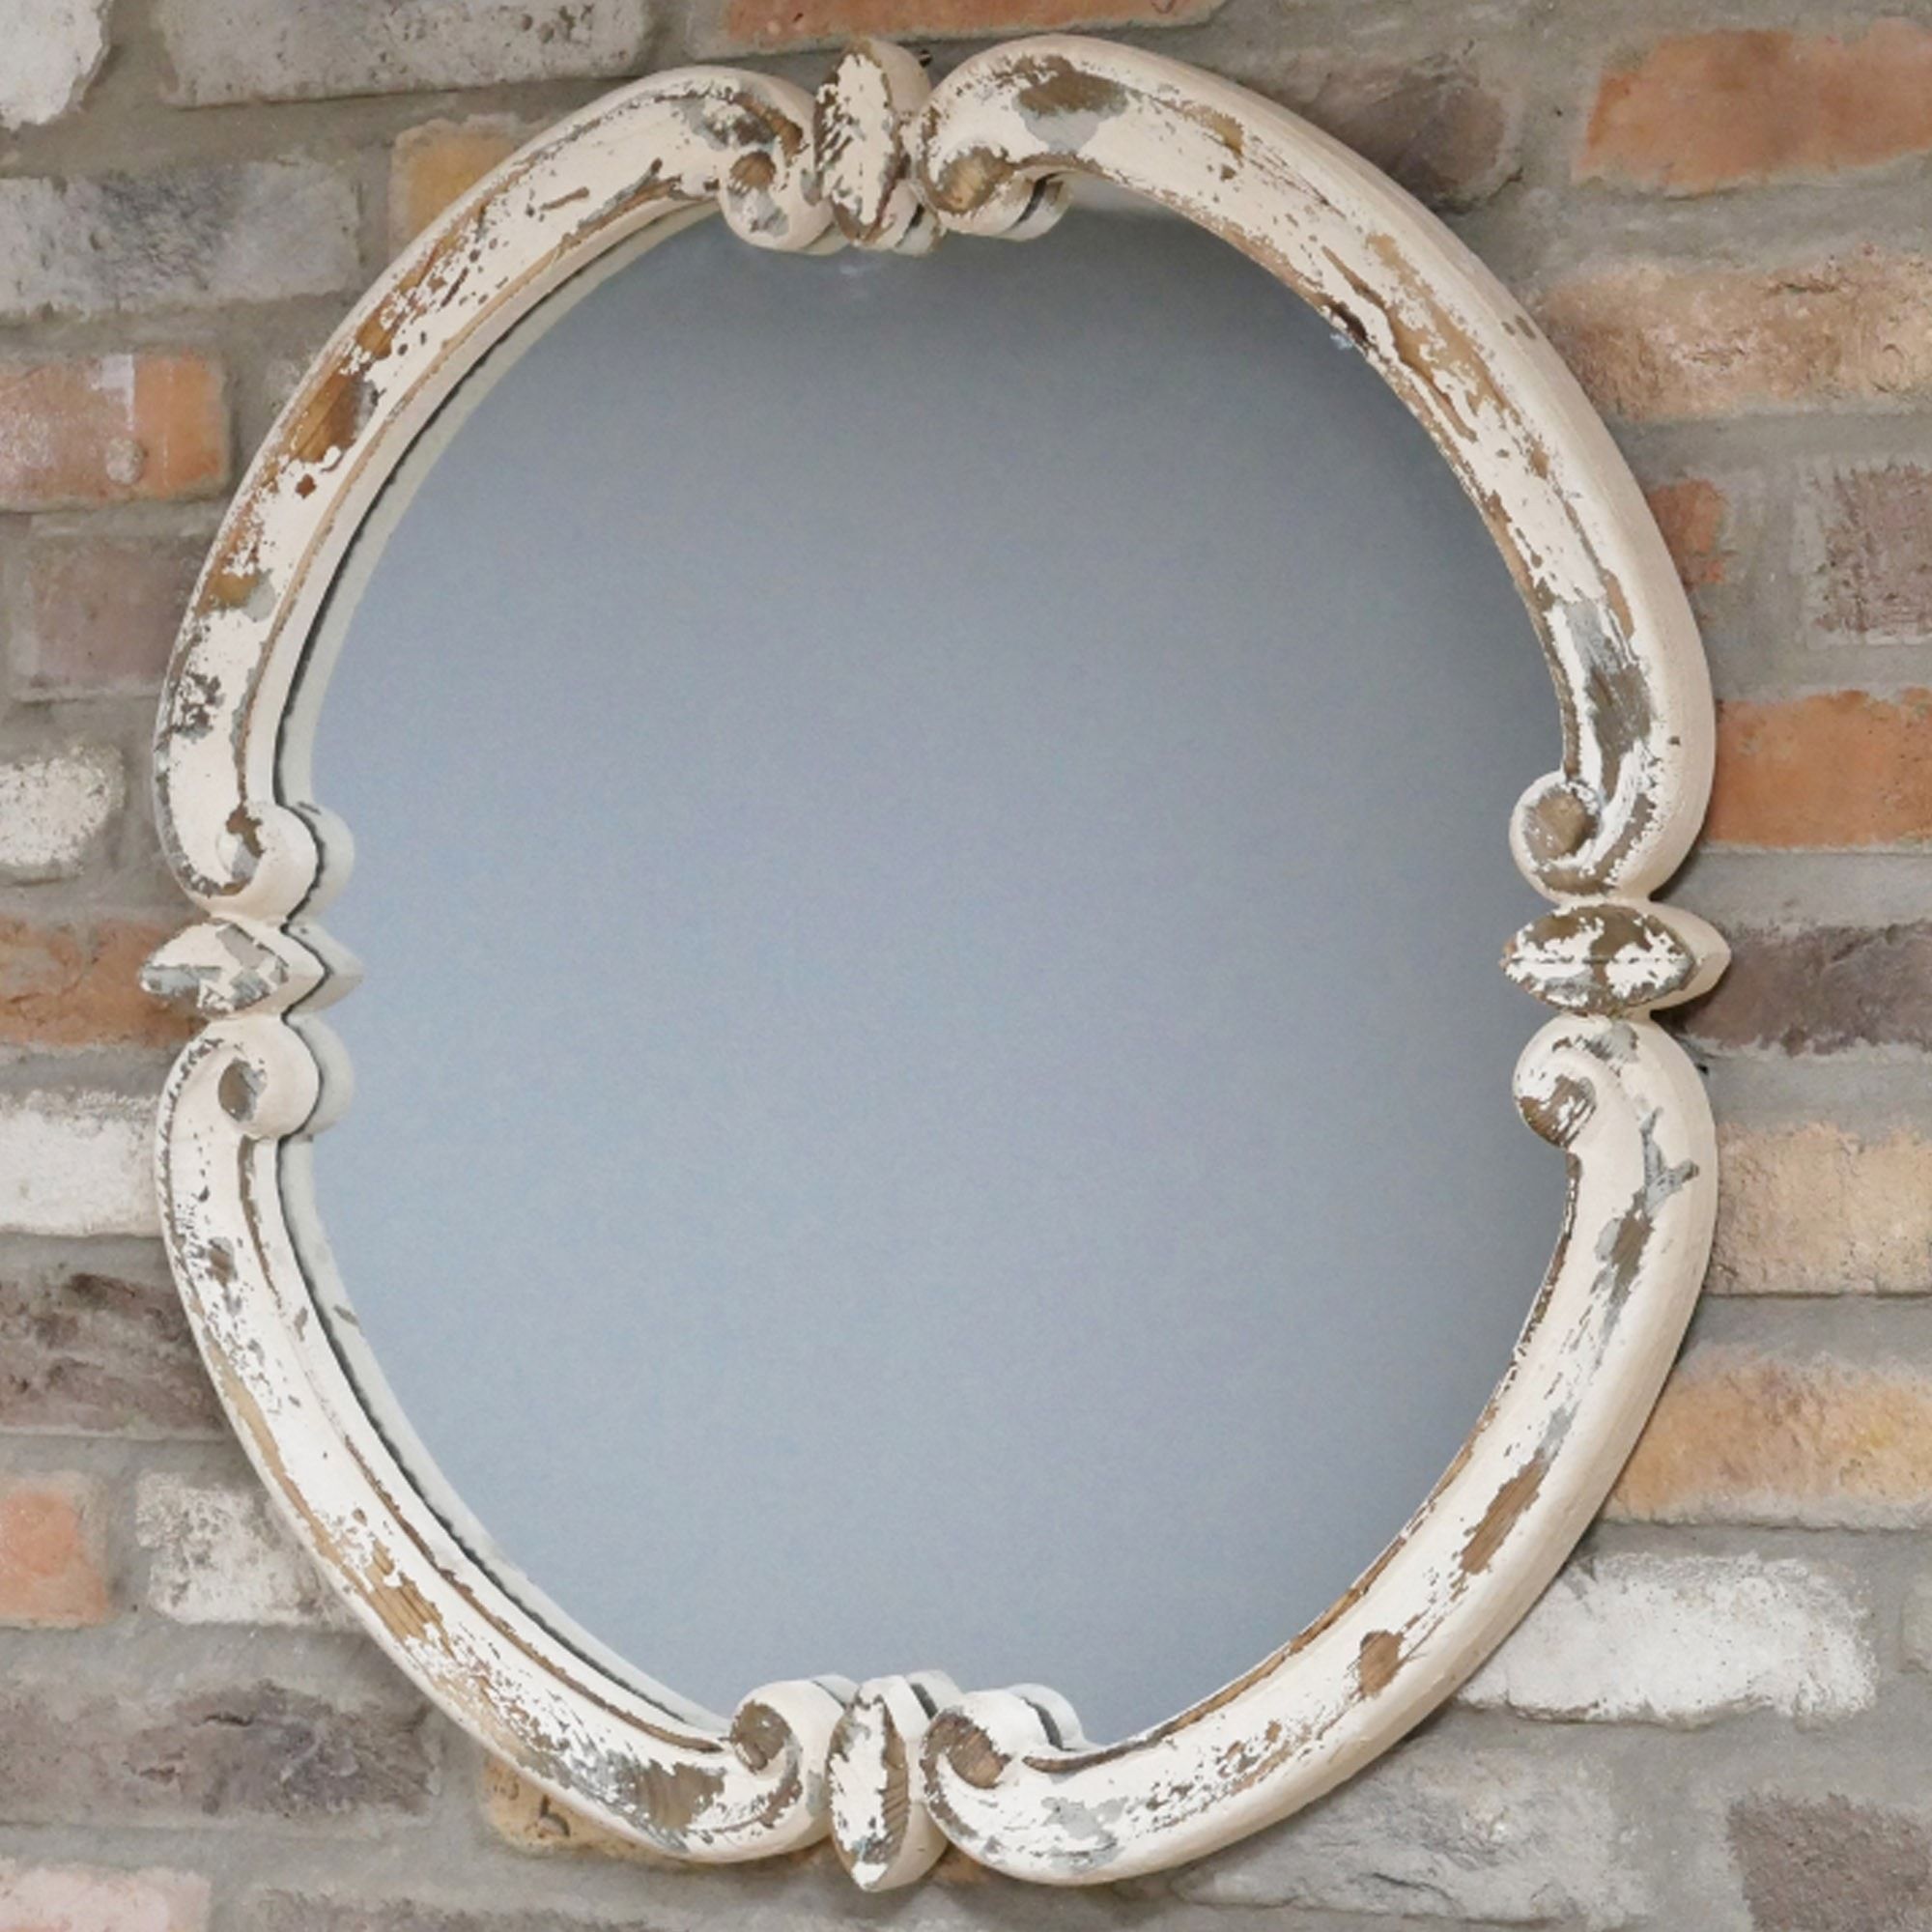 Distressed White Mirror | Wall Mirrors | Decorative Mirrors Throughout Wall Mirrors (View 12 of 15)